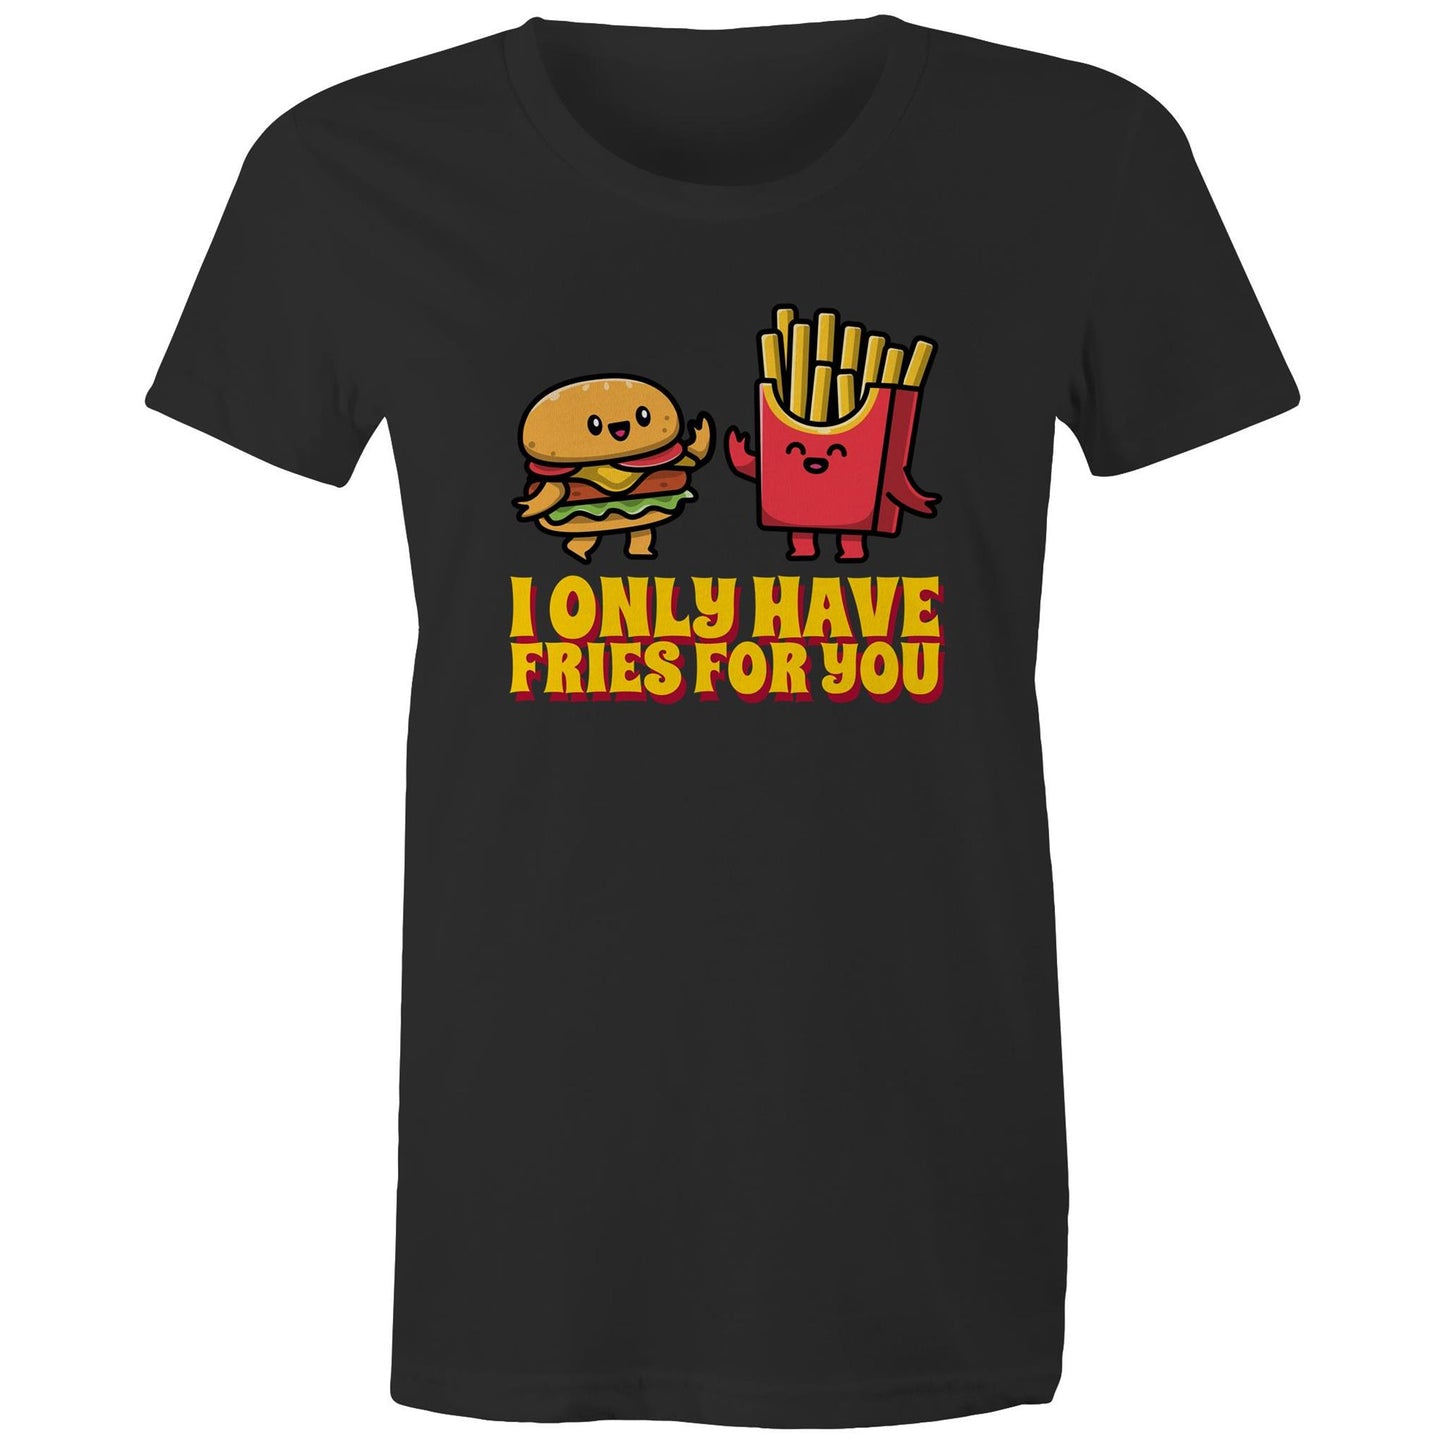 I Only Have Fries For You, Burger And Fries - Womens T-shirt Black Womens T-shirt